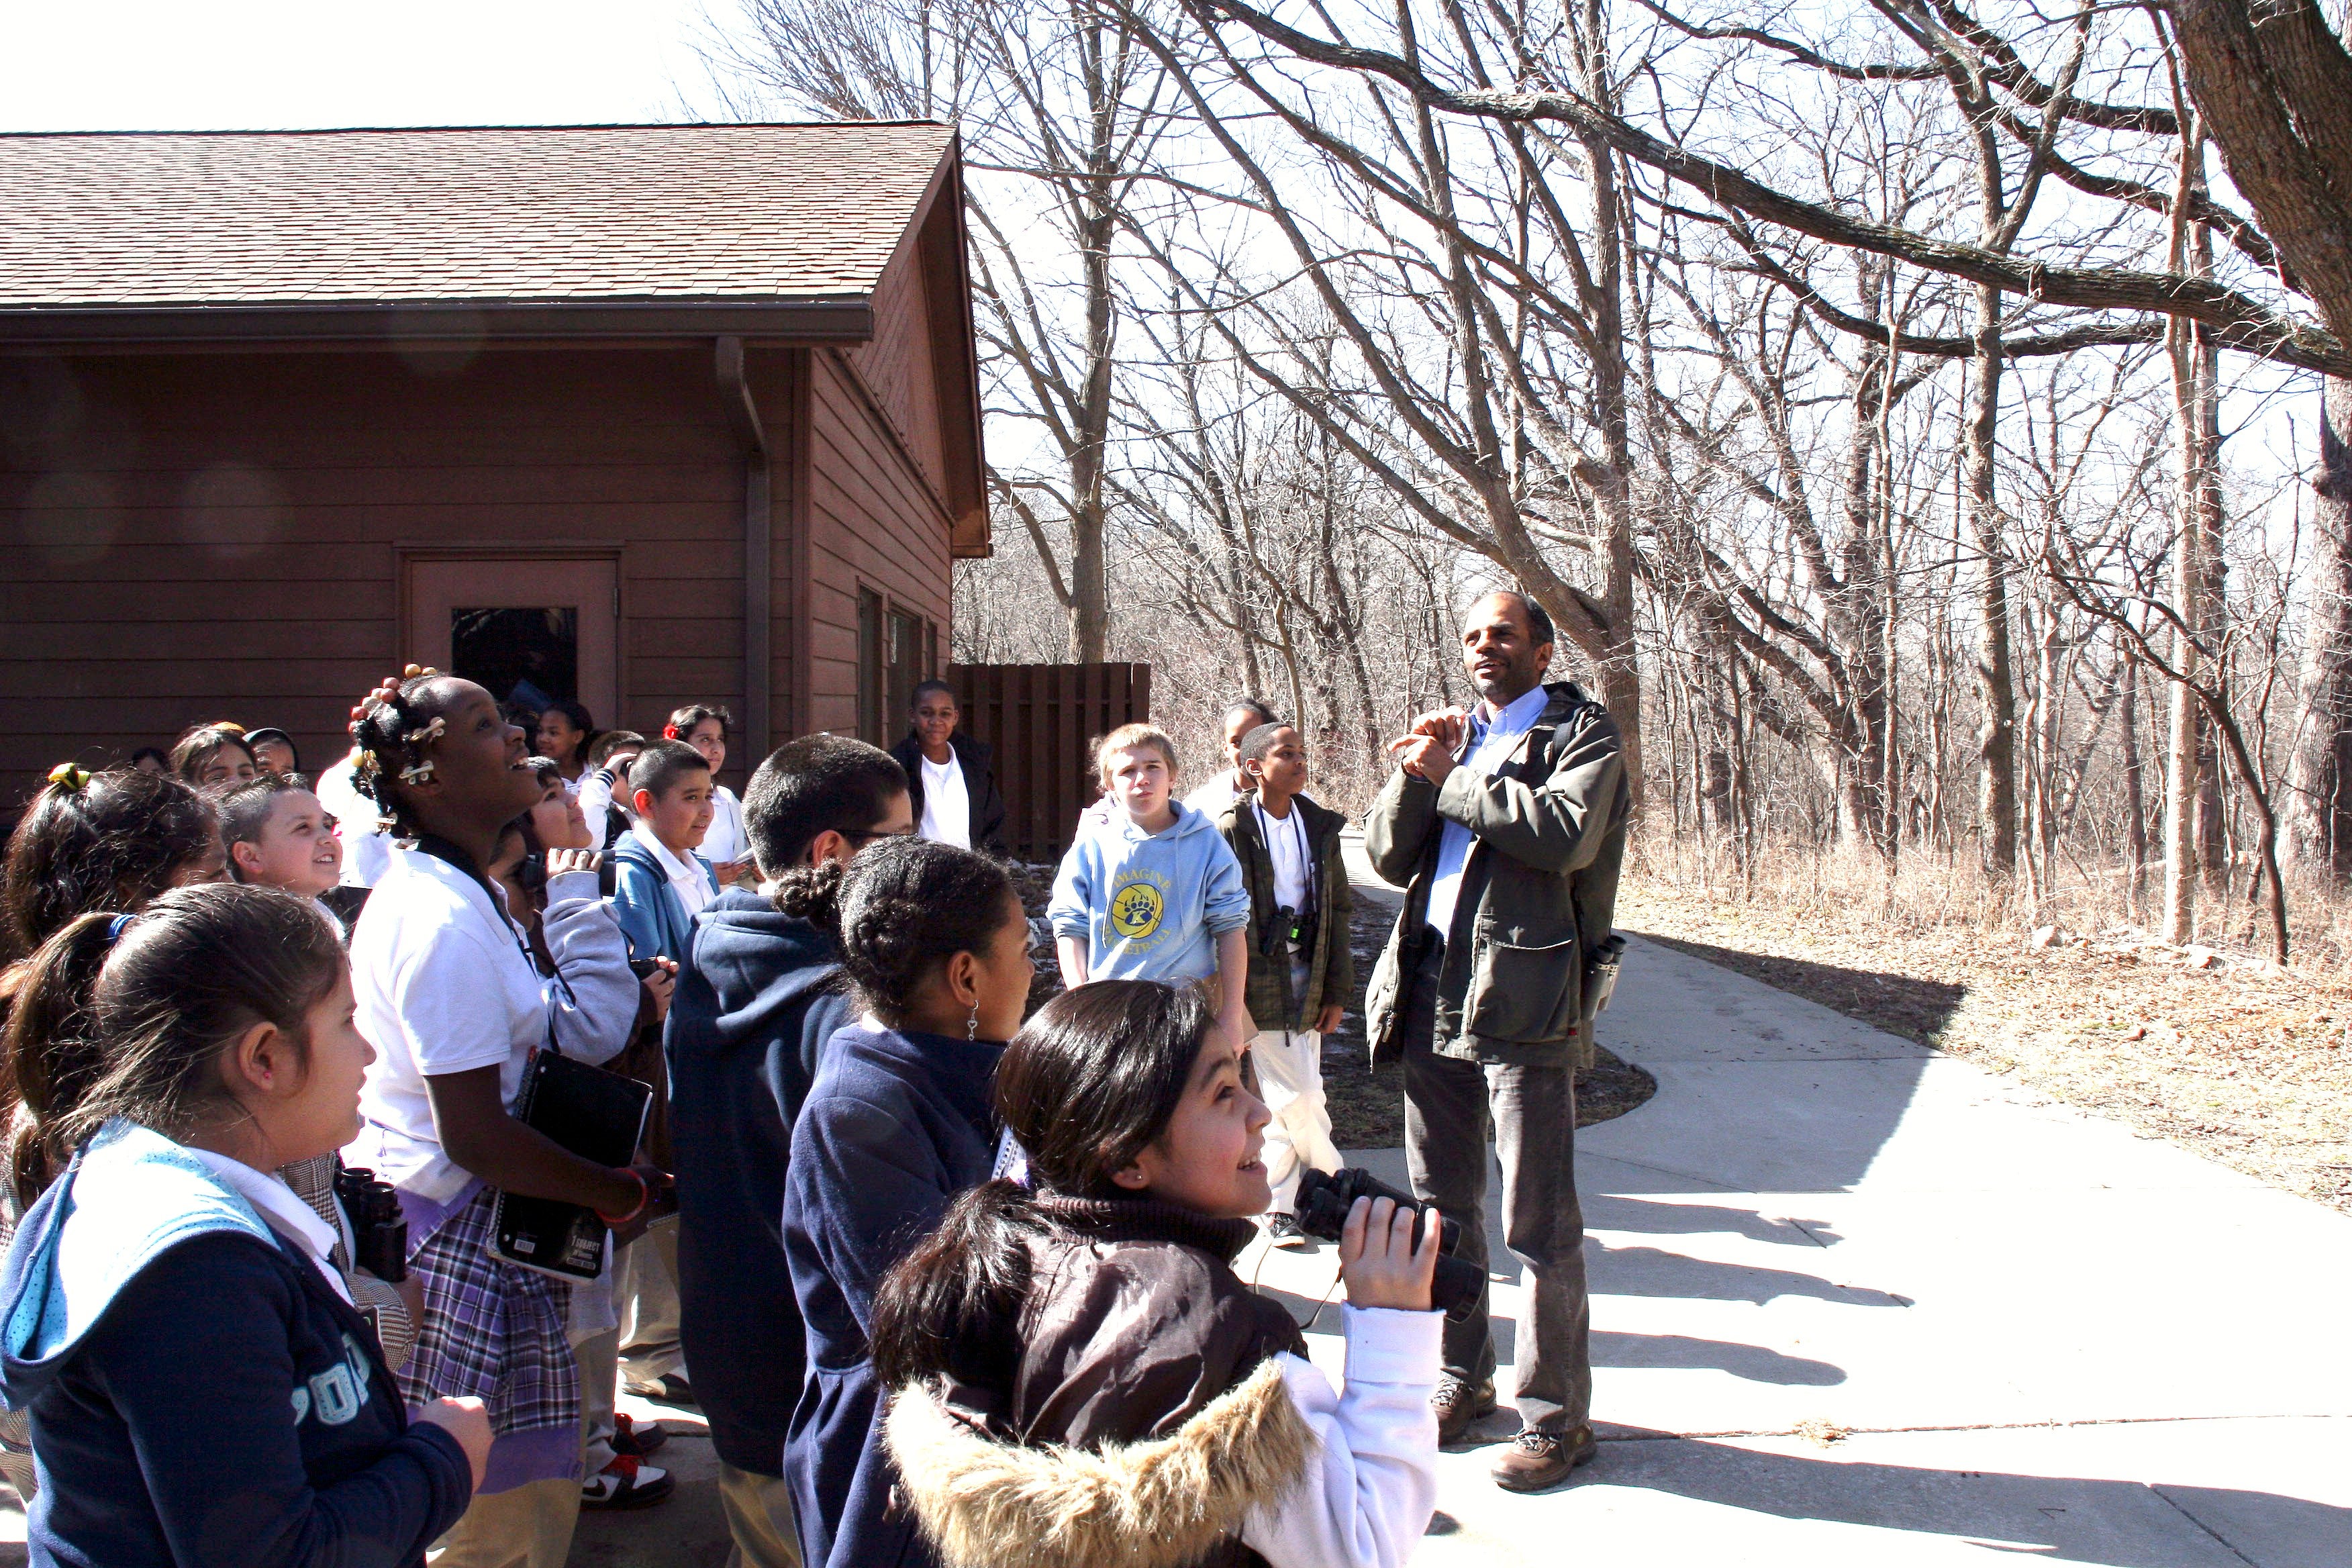 An ornithologist instructs a group of schoolchildren how to birdwatch. Several of the children are holding binoculars.